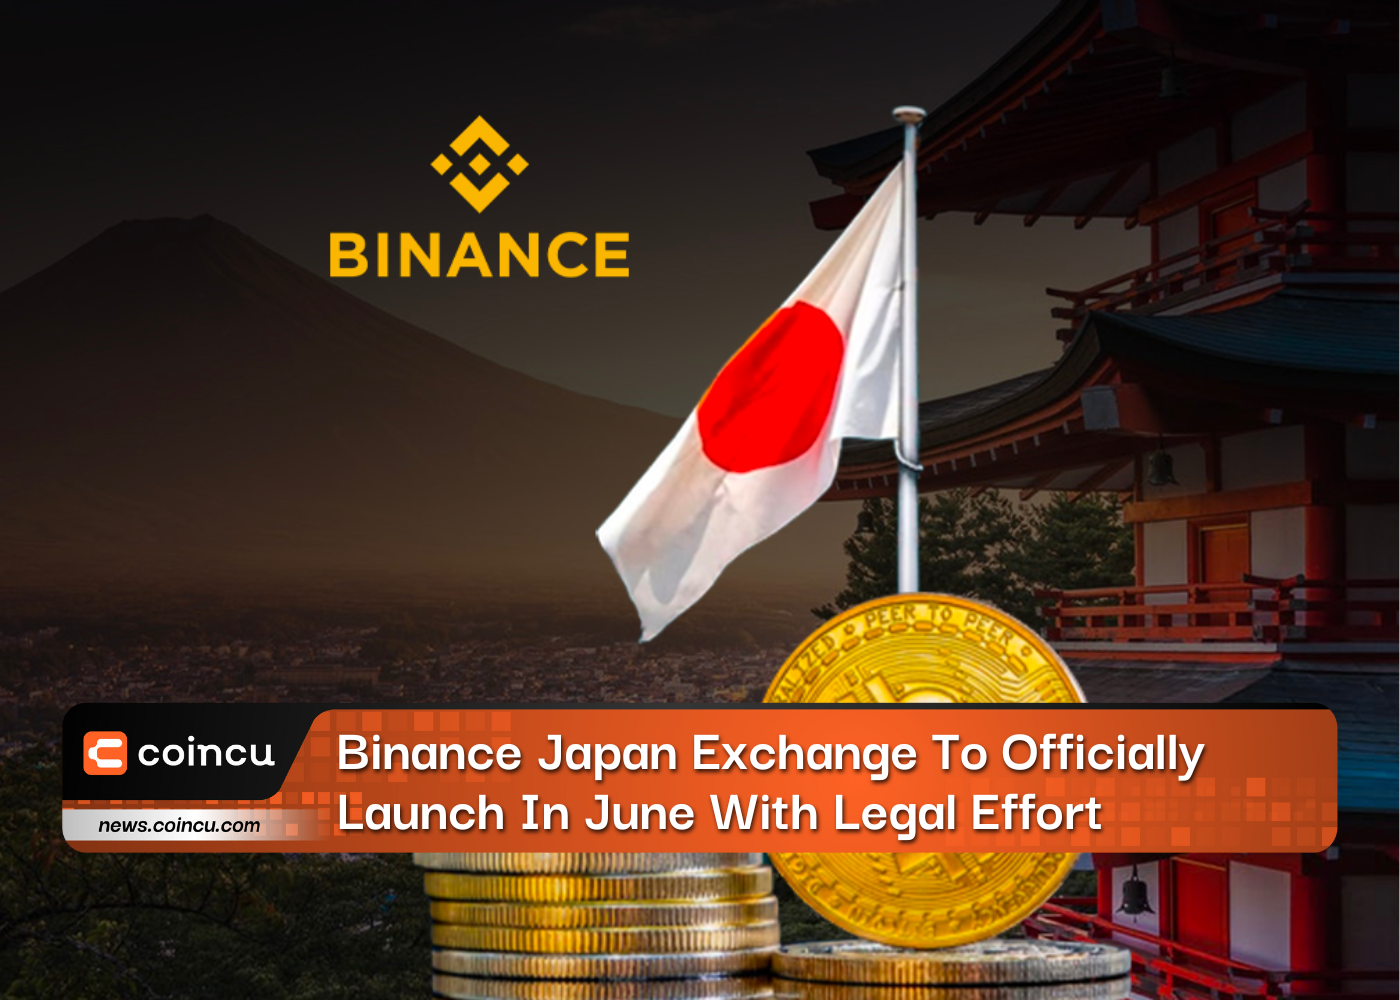 Binance Japan Exchange To Officially Launch In June With Legal Effort